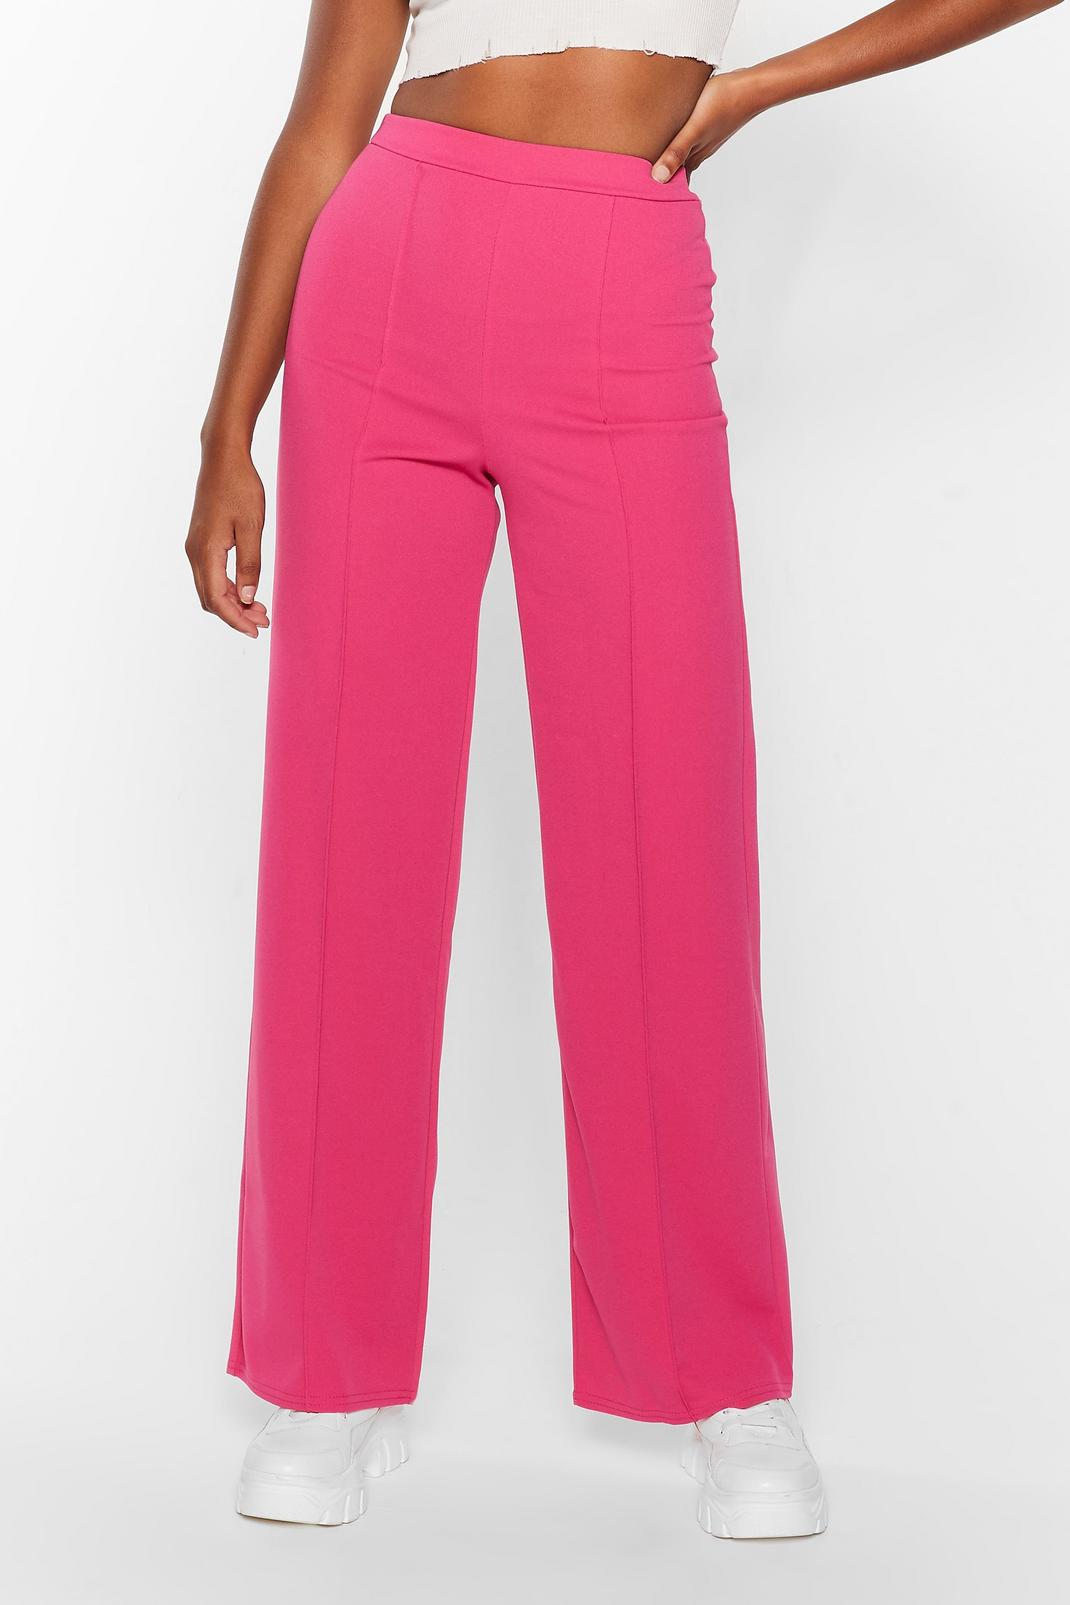 Hot pink Seam You Lookin' High-Waisted Wide-Leg Pants image number 1